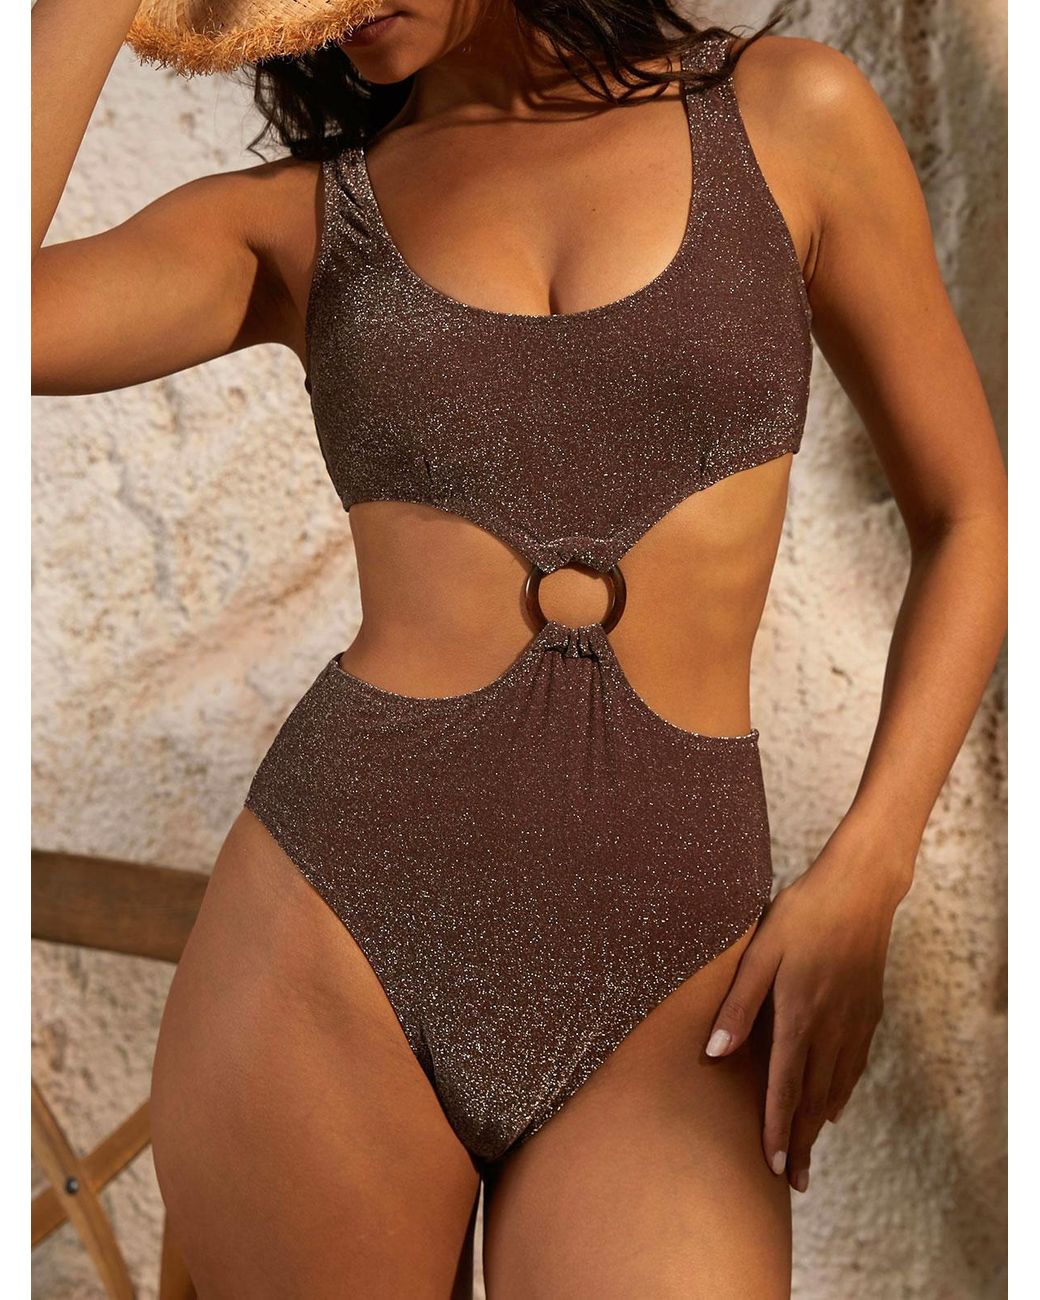 Zaful O-ring Cut Out Metallic Sparkly Glitter Monokini One-piece Swimsuit  in Brown | Lyst UK